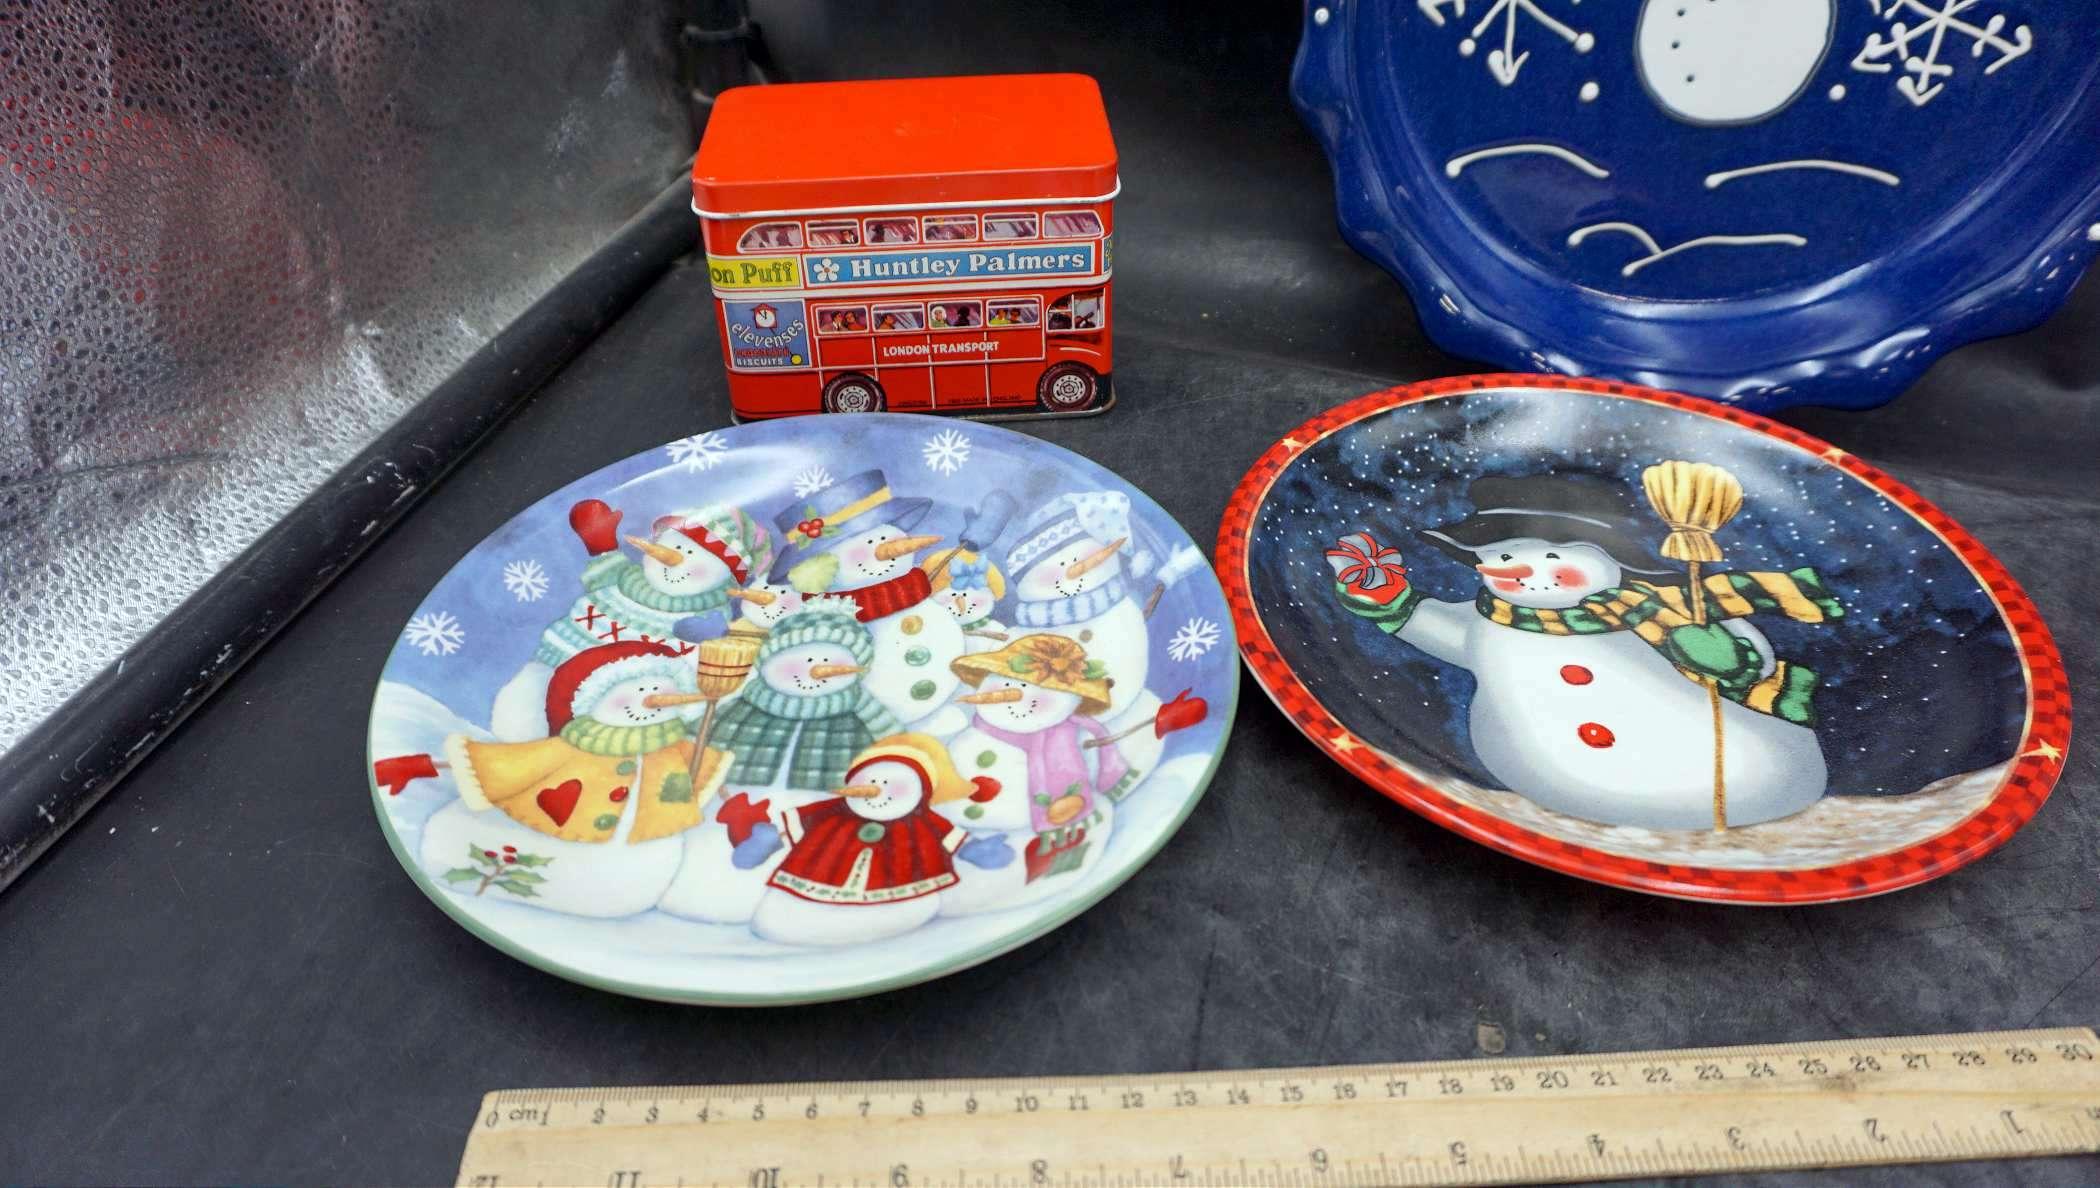 Huntley Palmers Tin Container & Snowman Pieces - Plates, Pie Pan & Mugs